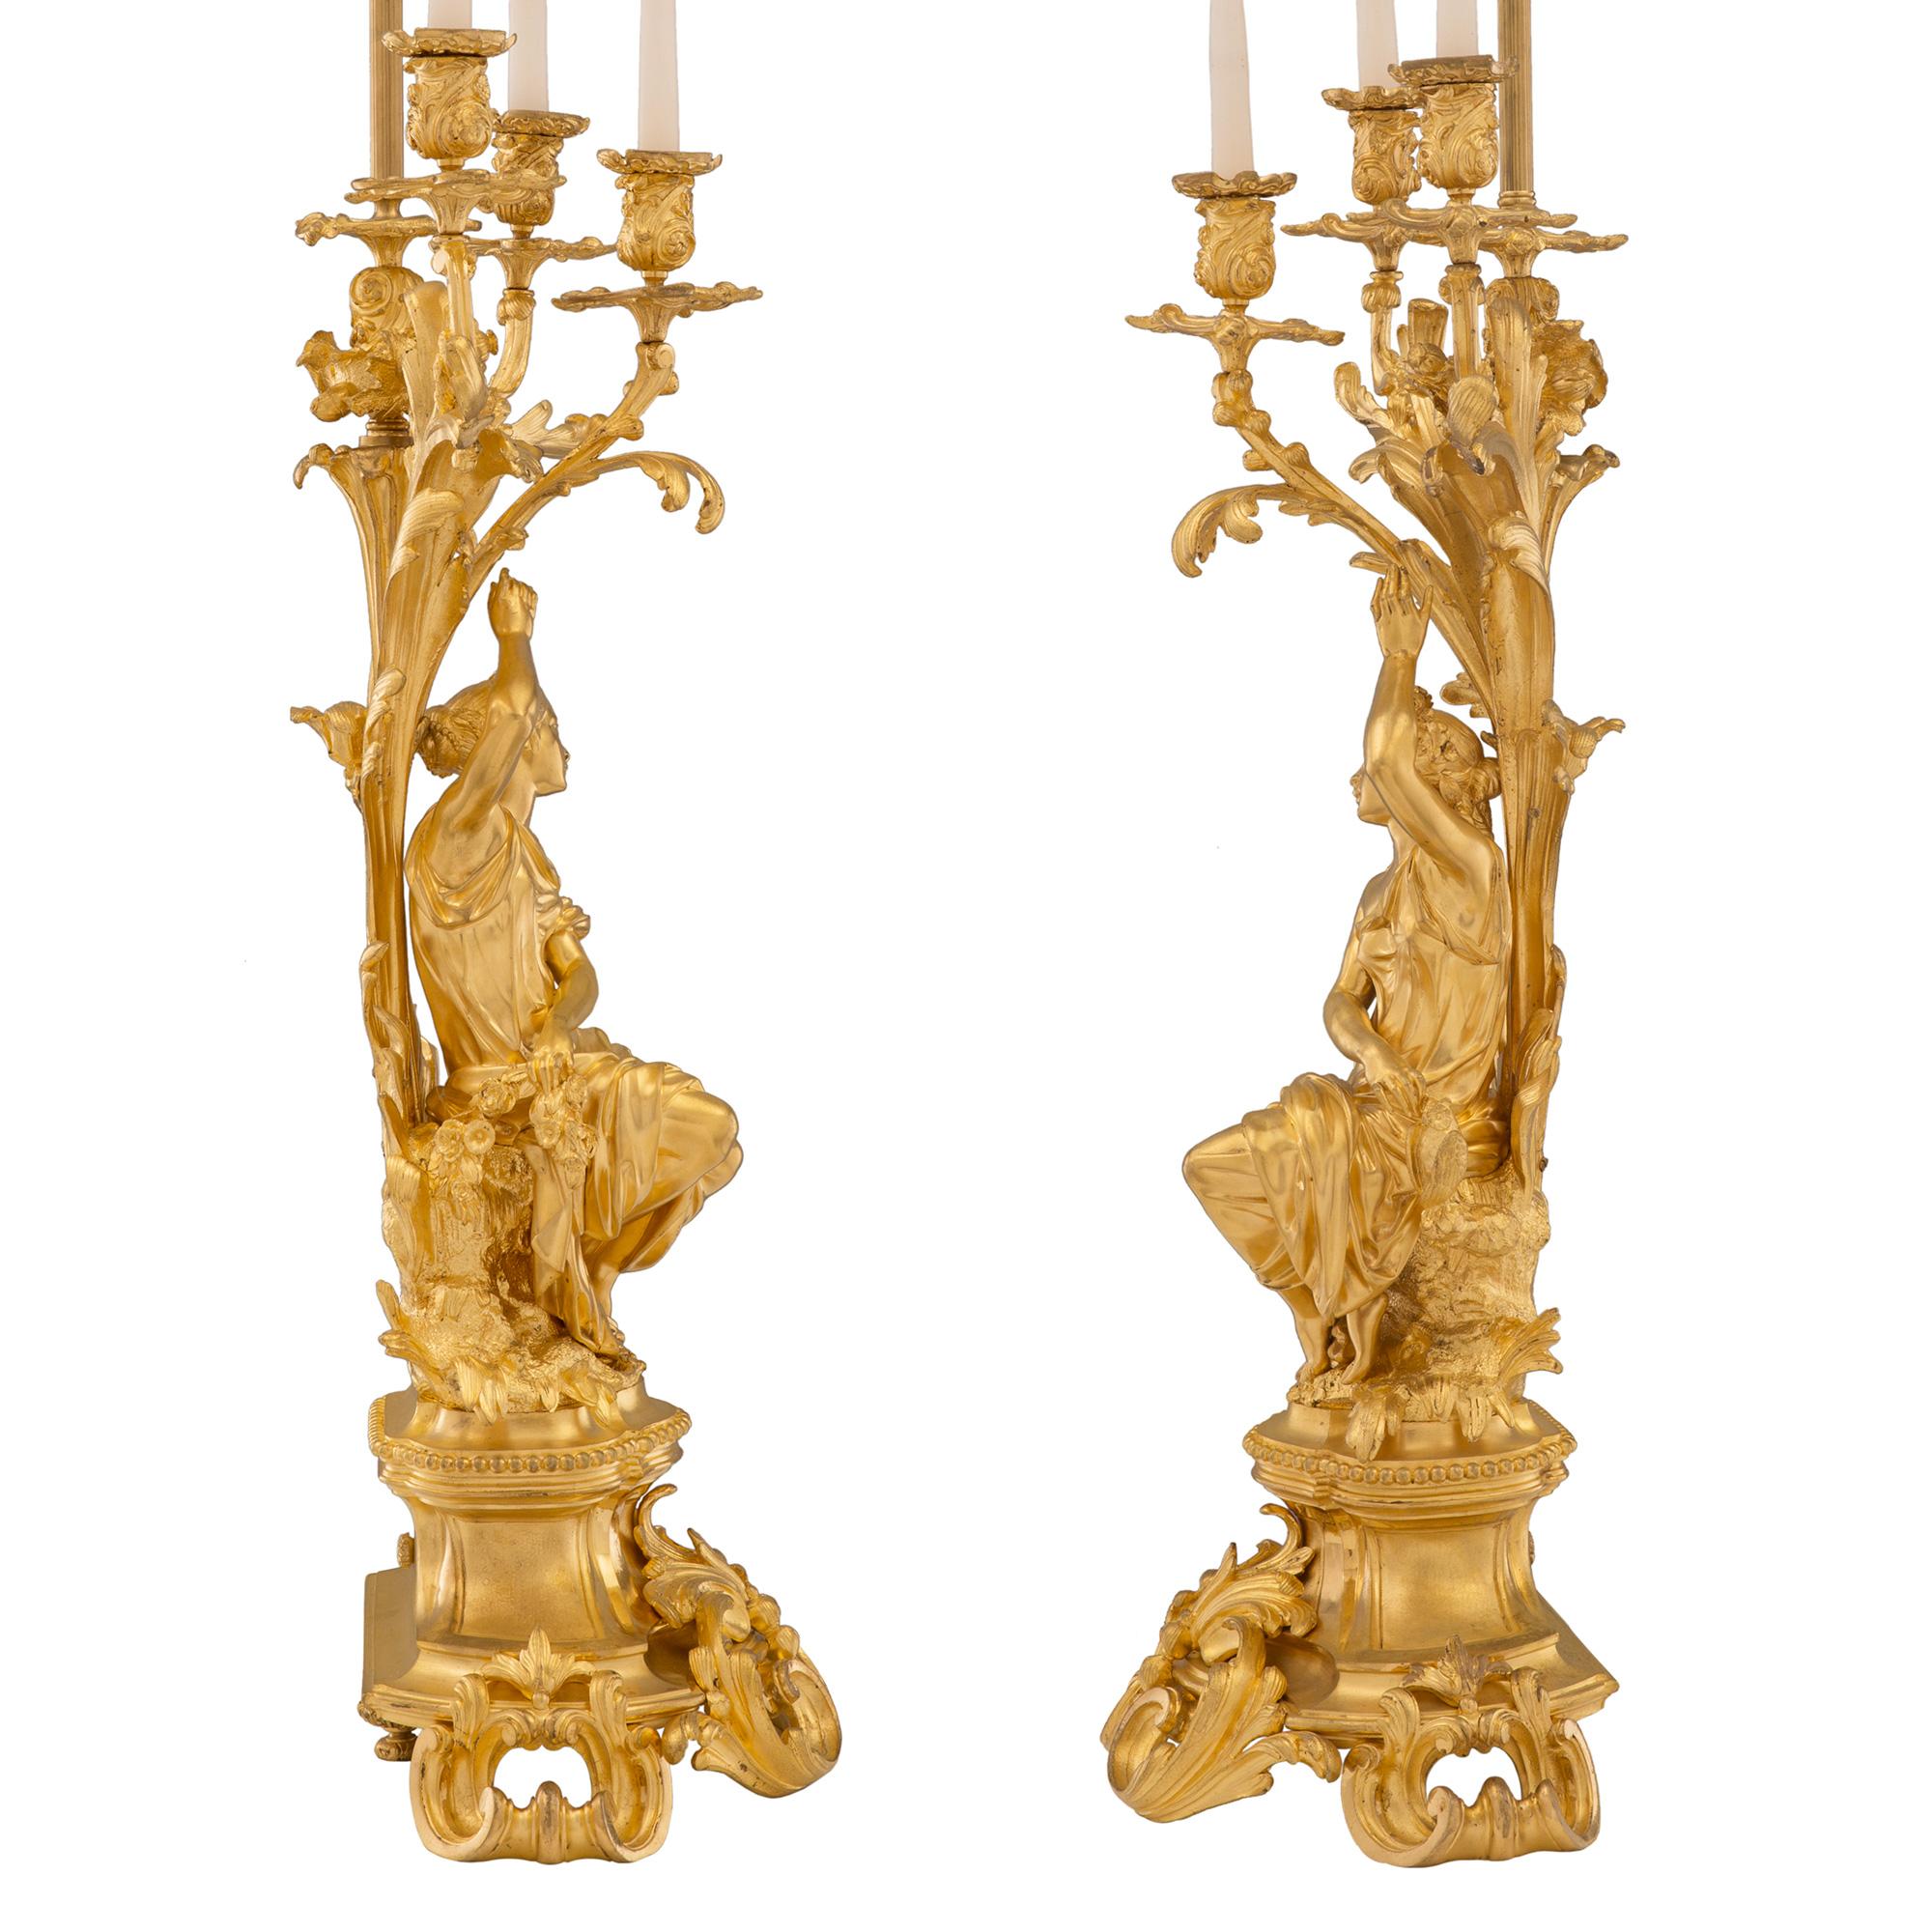 A sensational and extremely high quality French 19th century Louis XV st. Belle Époque period ormolu candelabras lamps, signed Picard. Each lamp is raised by a striking and most decorative socle shaped support with beautiful pierced scrolled foliate